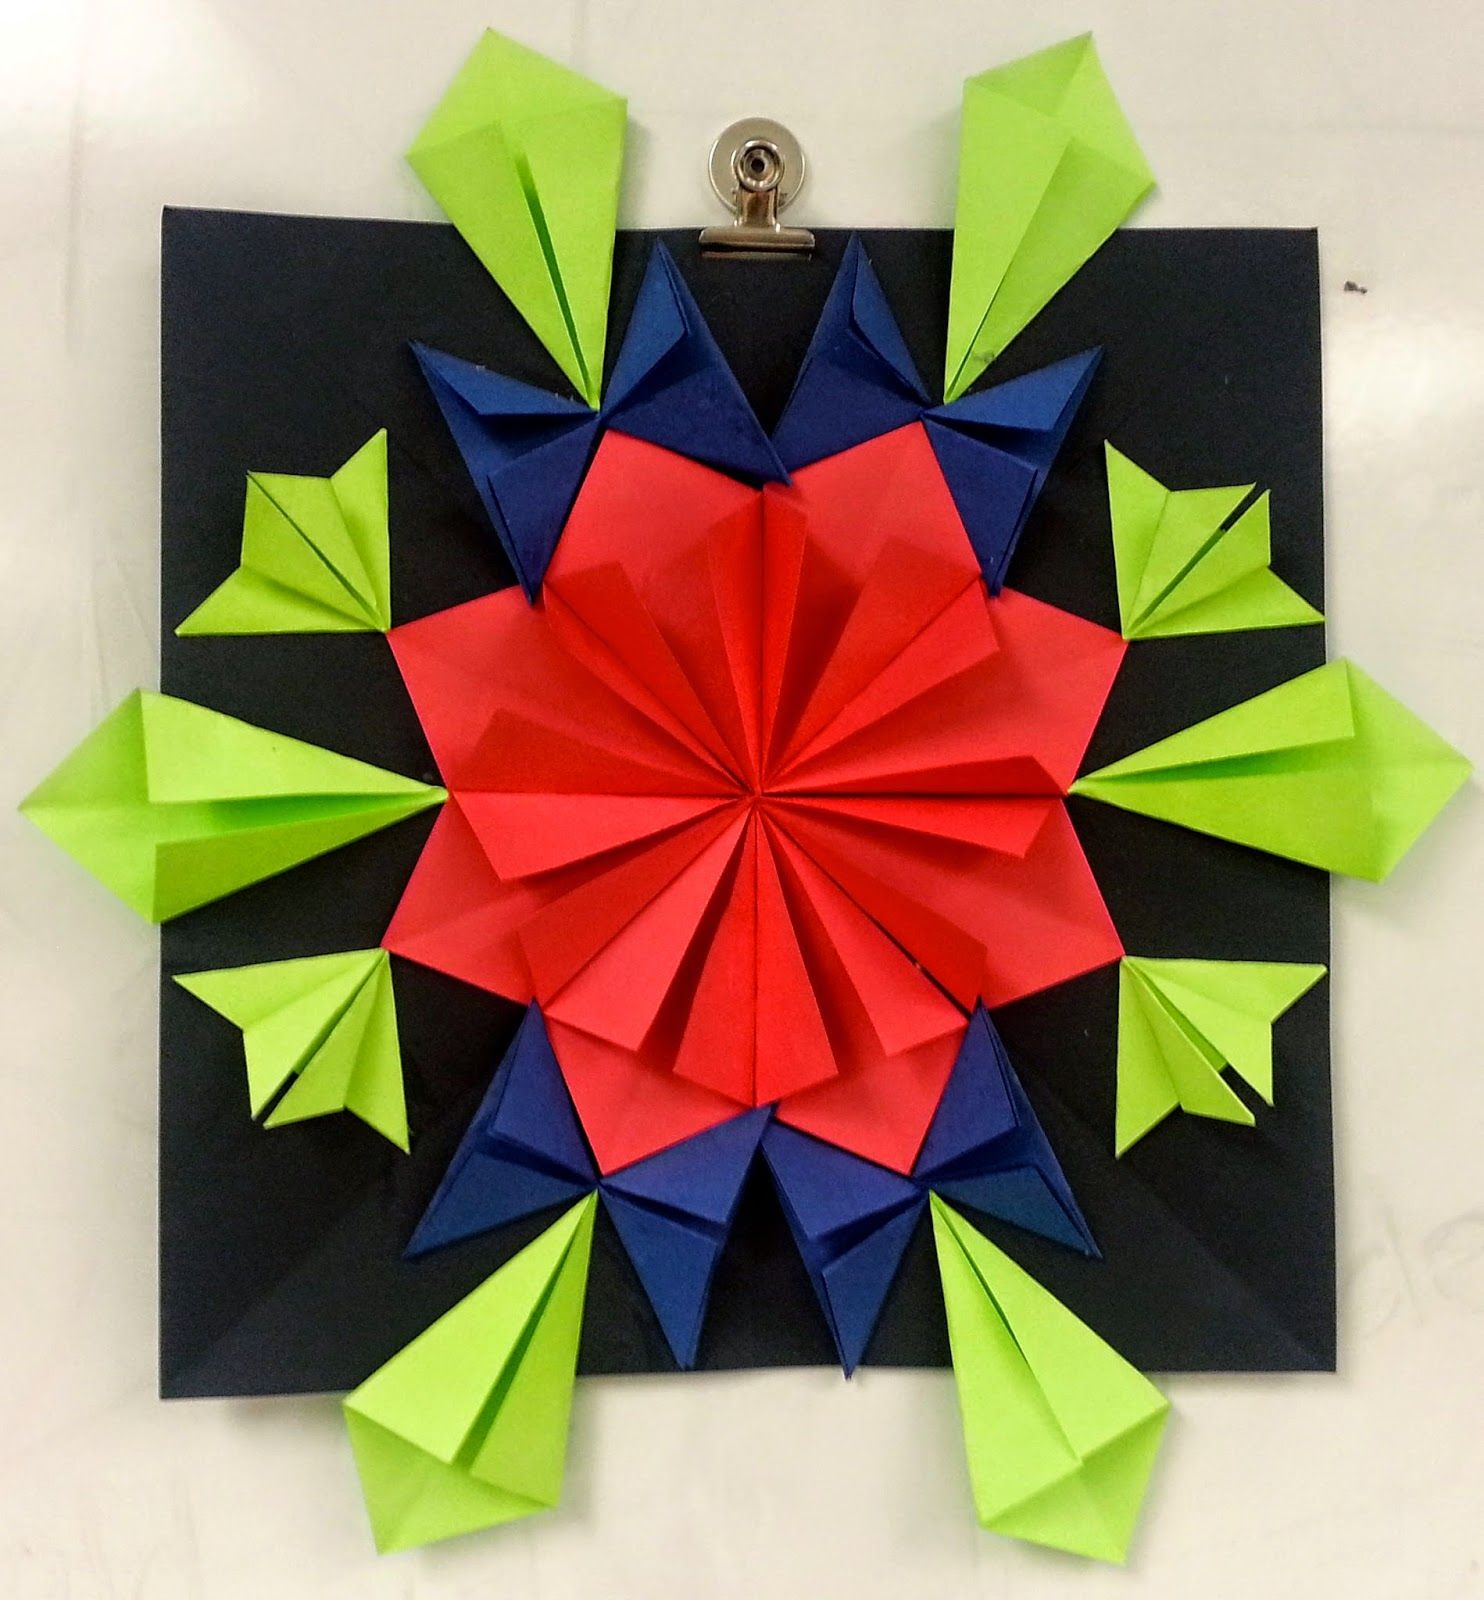 Origami Art Projects Paper Sculptures Radial Paper Relief Sculptures 4th5th Art Lessons Pinterest